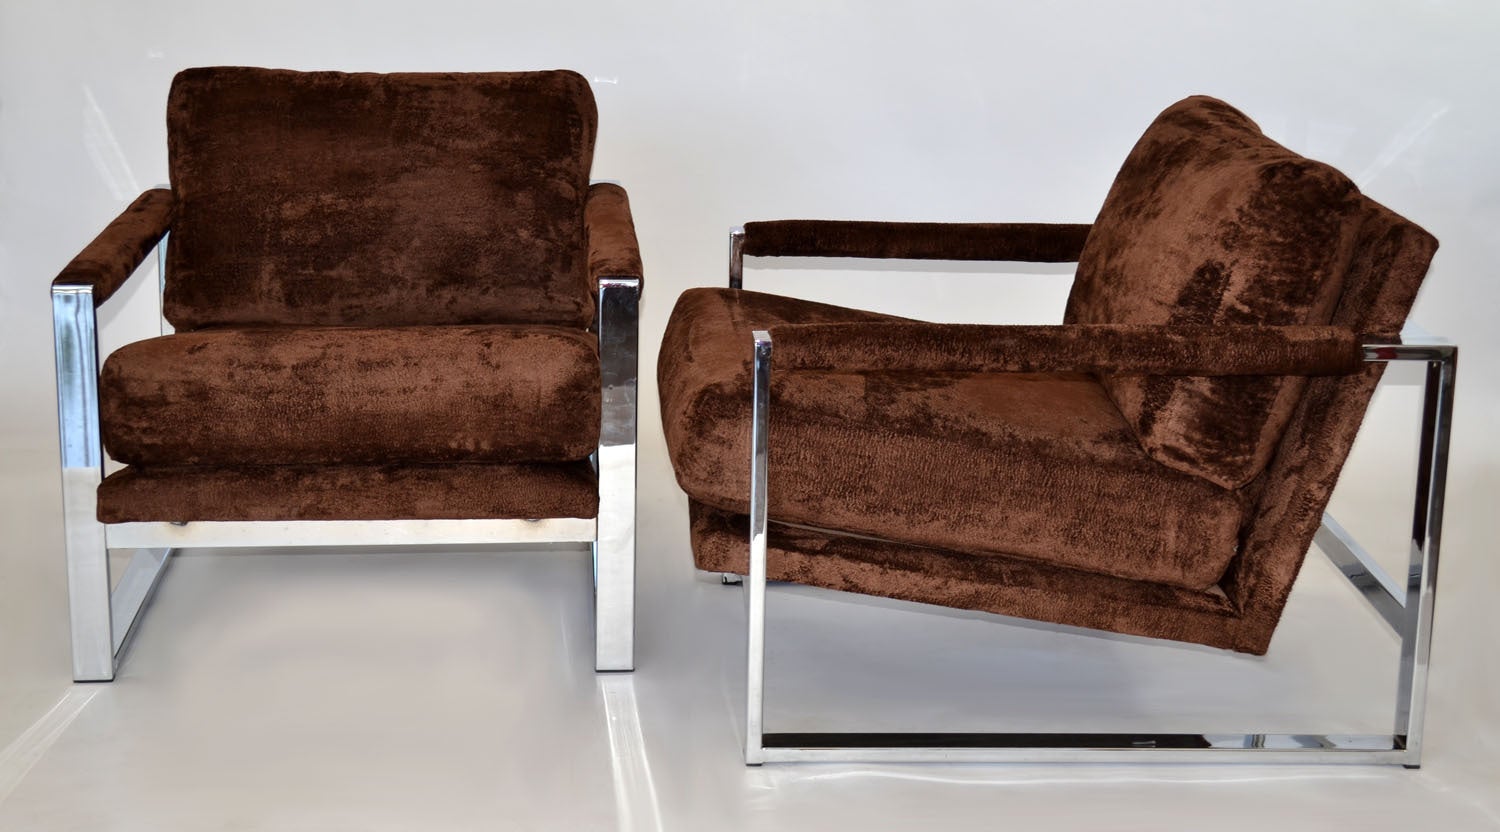 Pair of Wide Floating Lounge Chairs in Chrome & Chocolate Upholstery